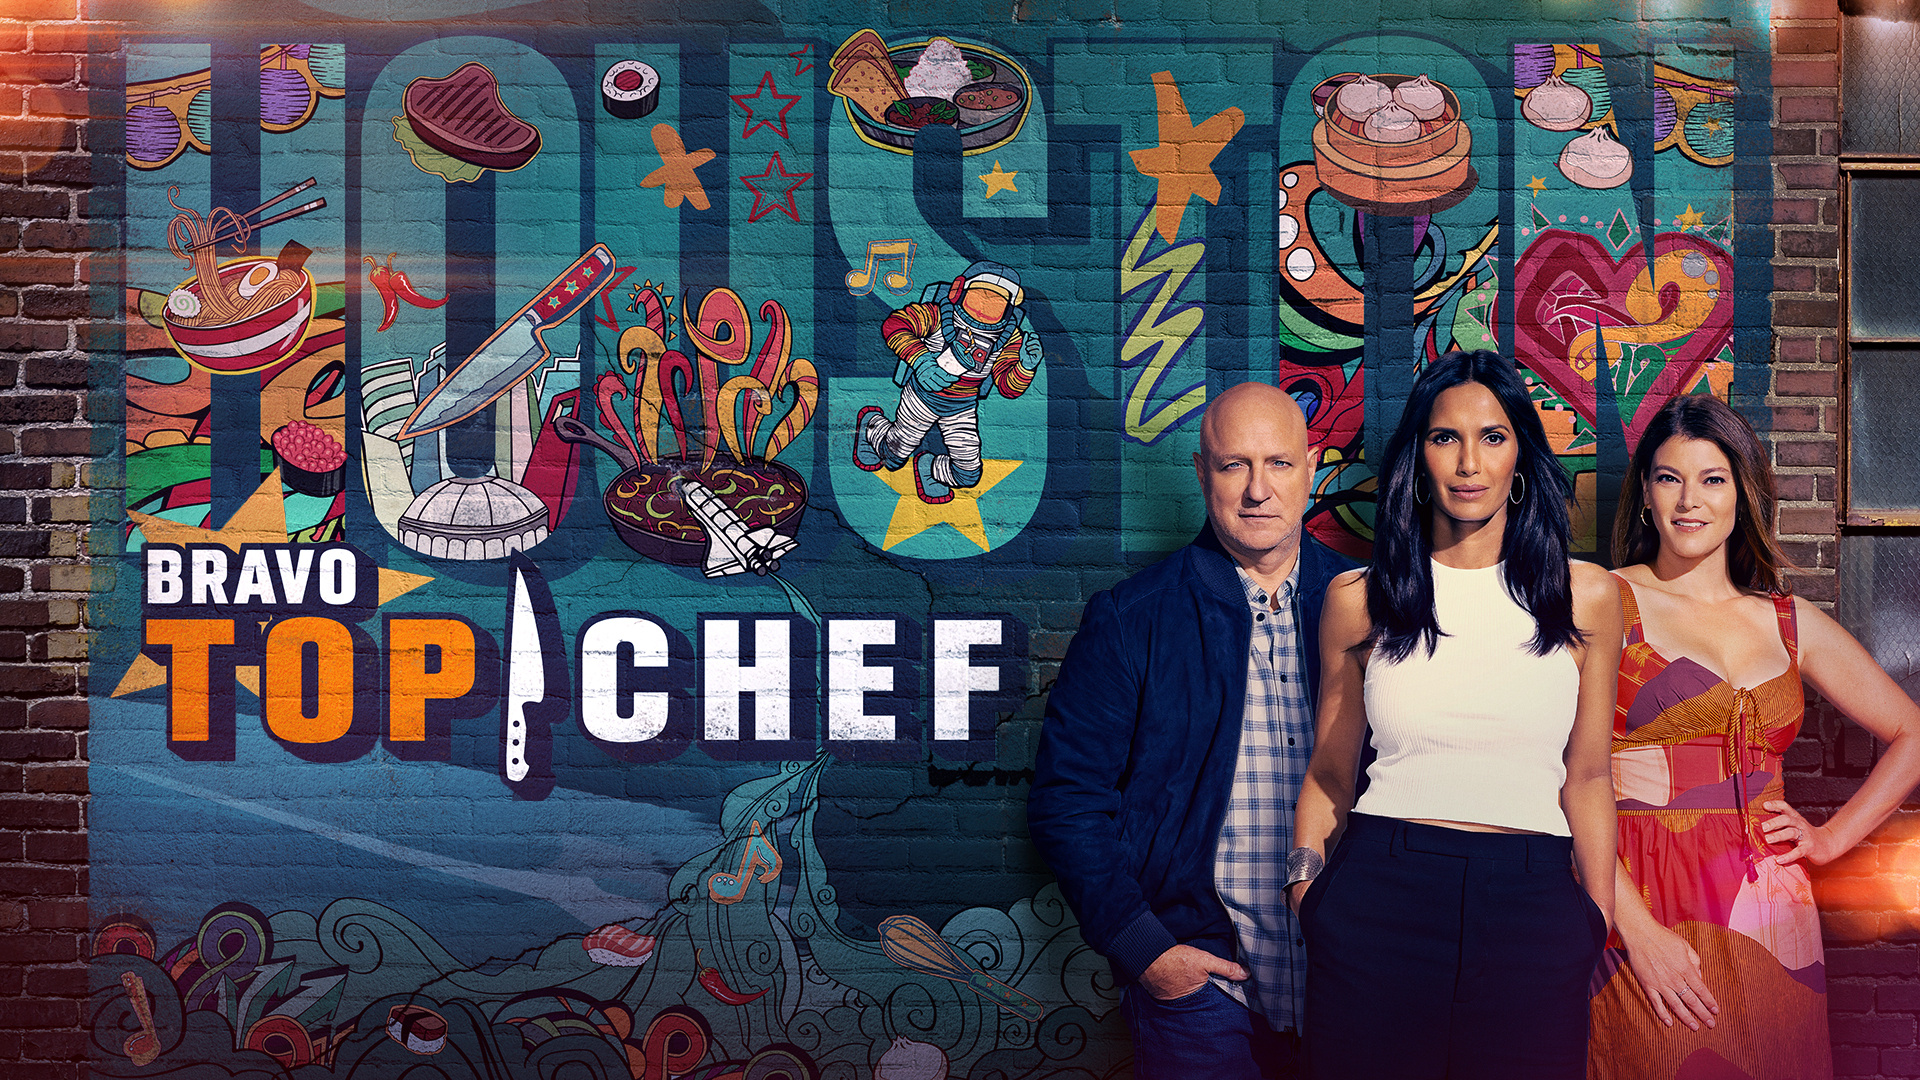 Top Chef, Bravo TV, TV shows, Cooking competition, 1920x1080 Full HD Desktop